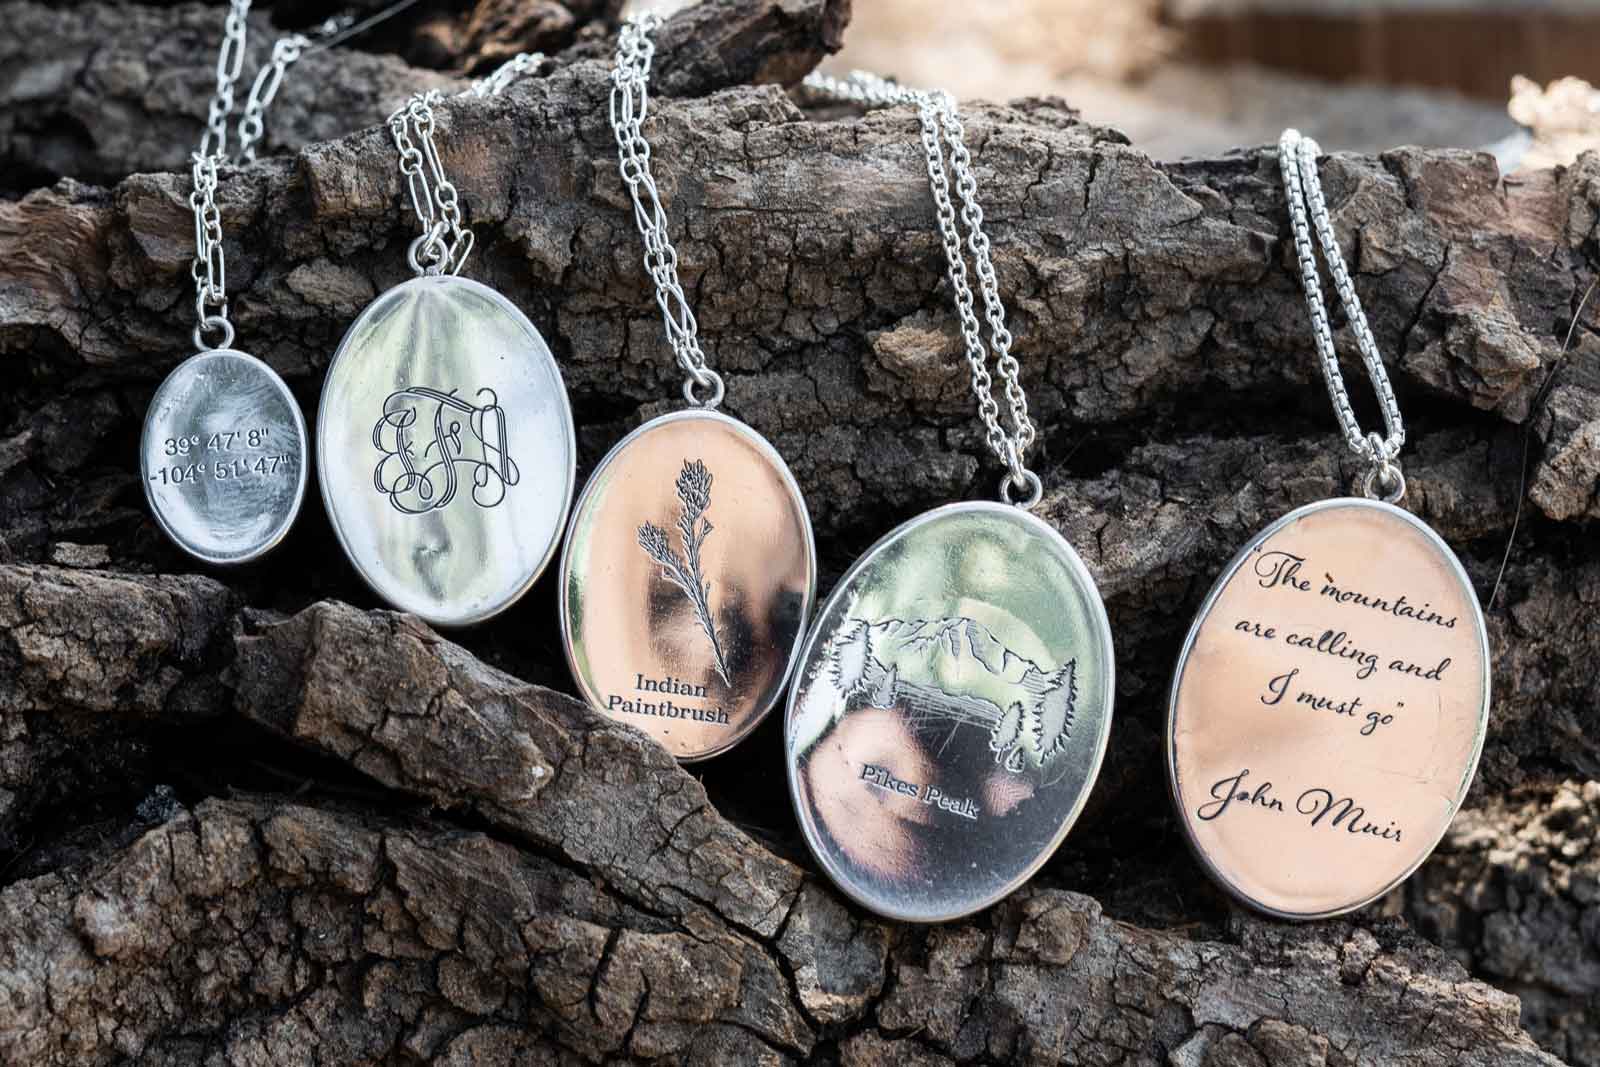 Sterling silver pendant necklaces engraved with personal messages and art